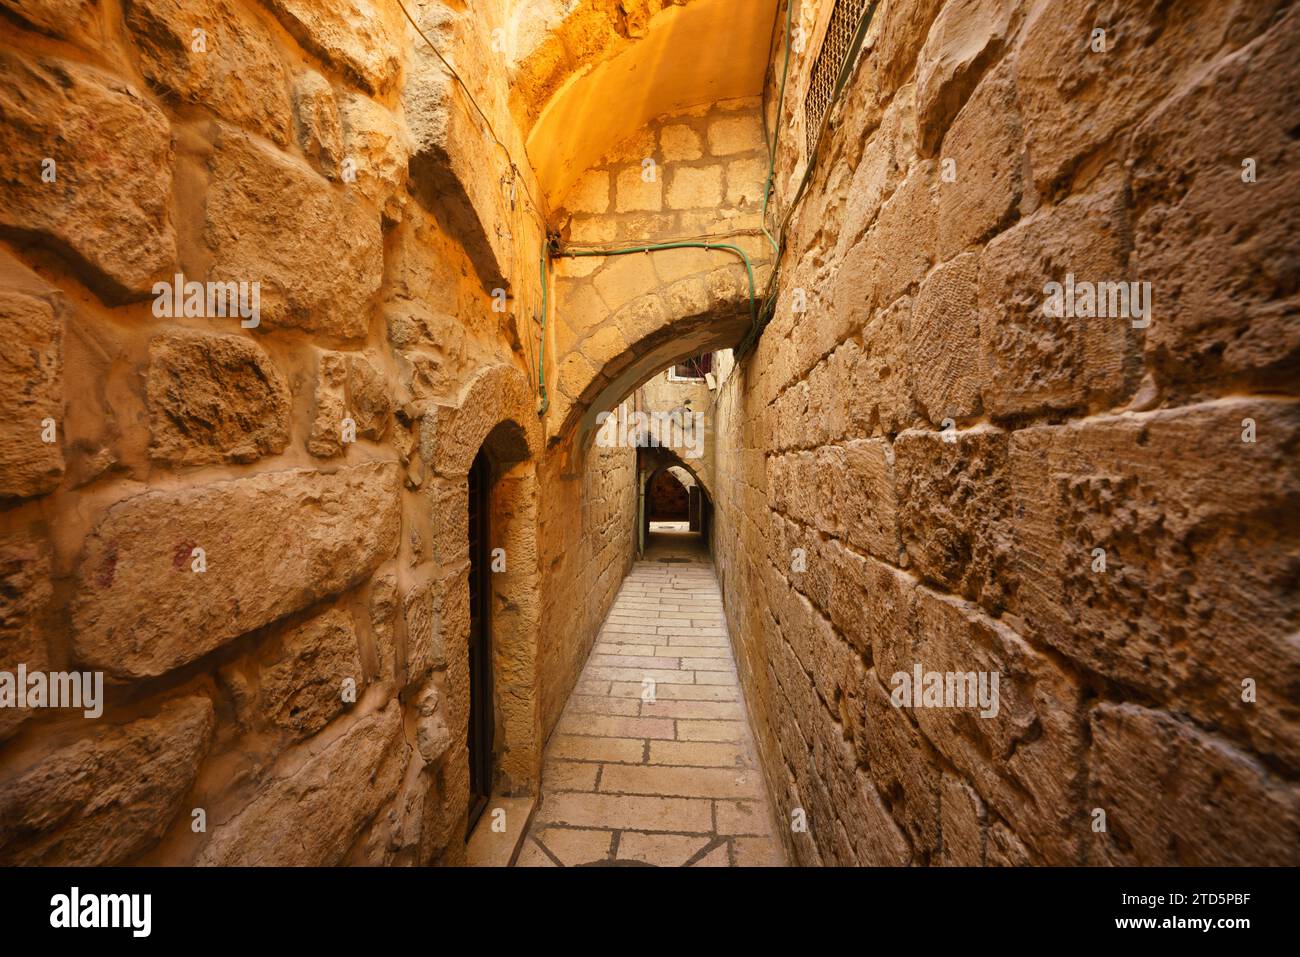 A narrow alley featuring arches and stone walls in the Muslim Quarter of the Old city of Jerusalem Stock Photo